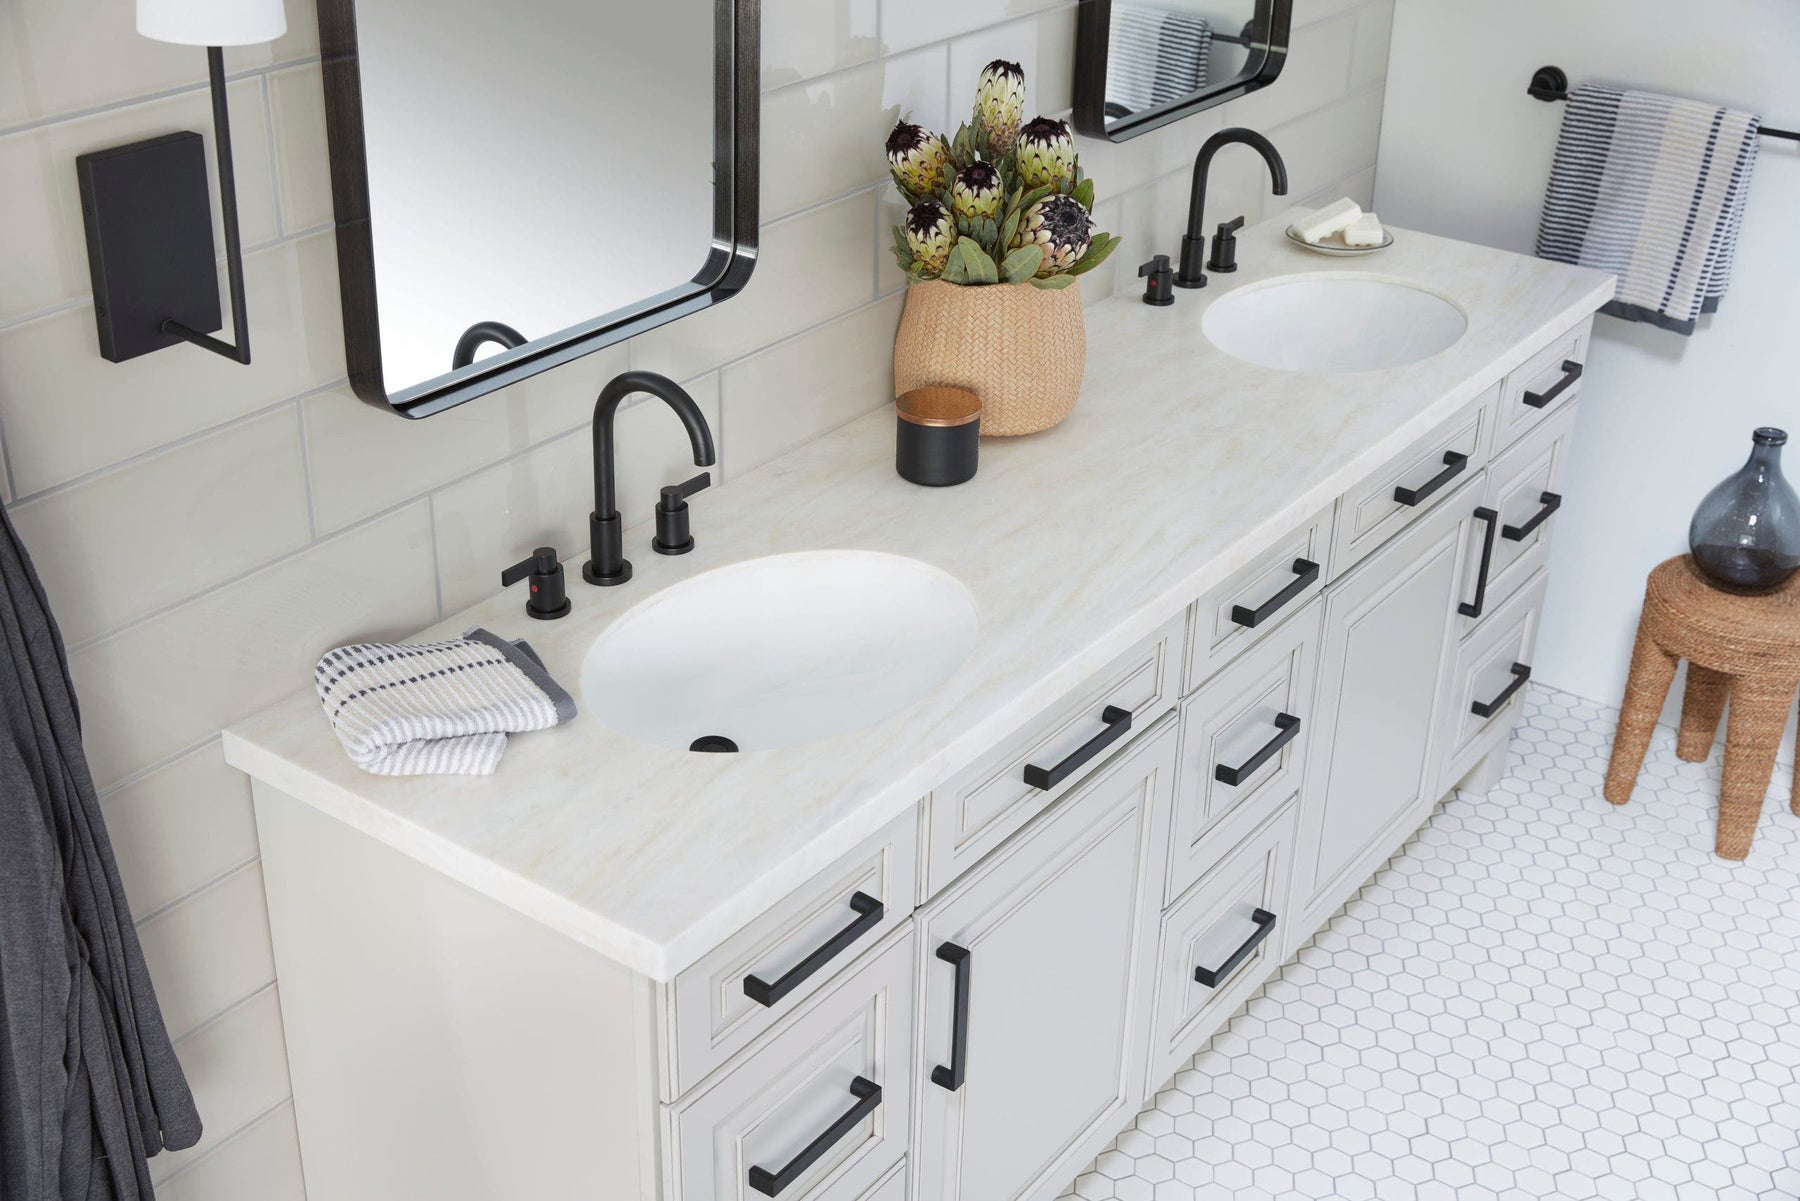 Guide to Matching Fixture Finishes to Bathroom Styles